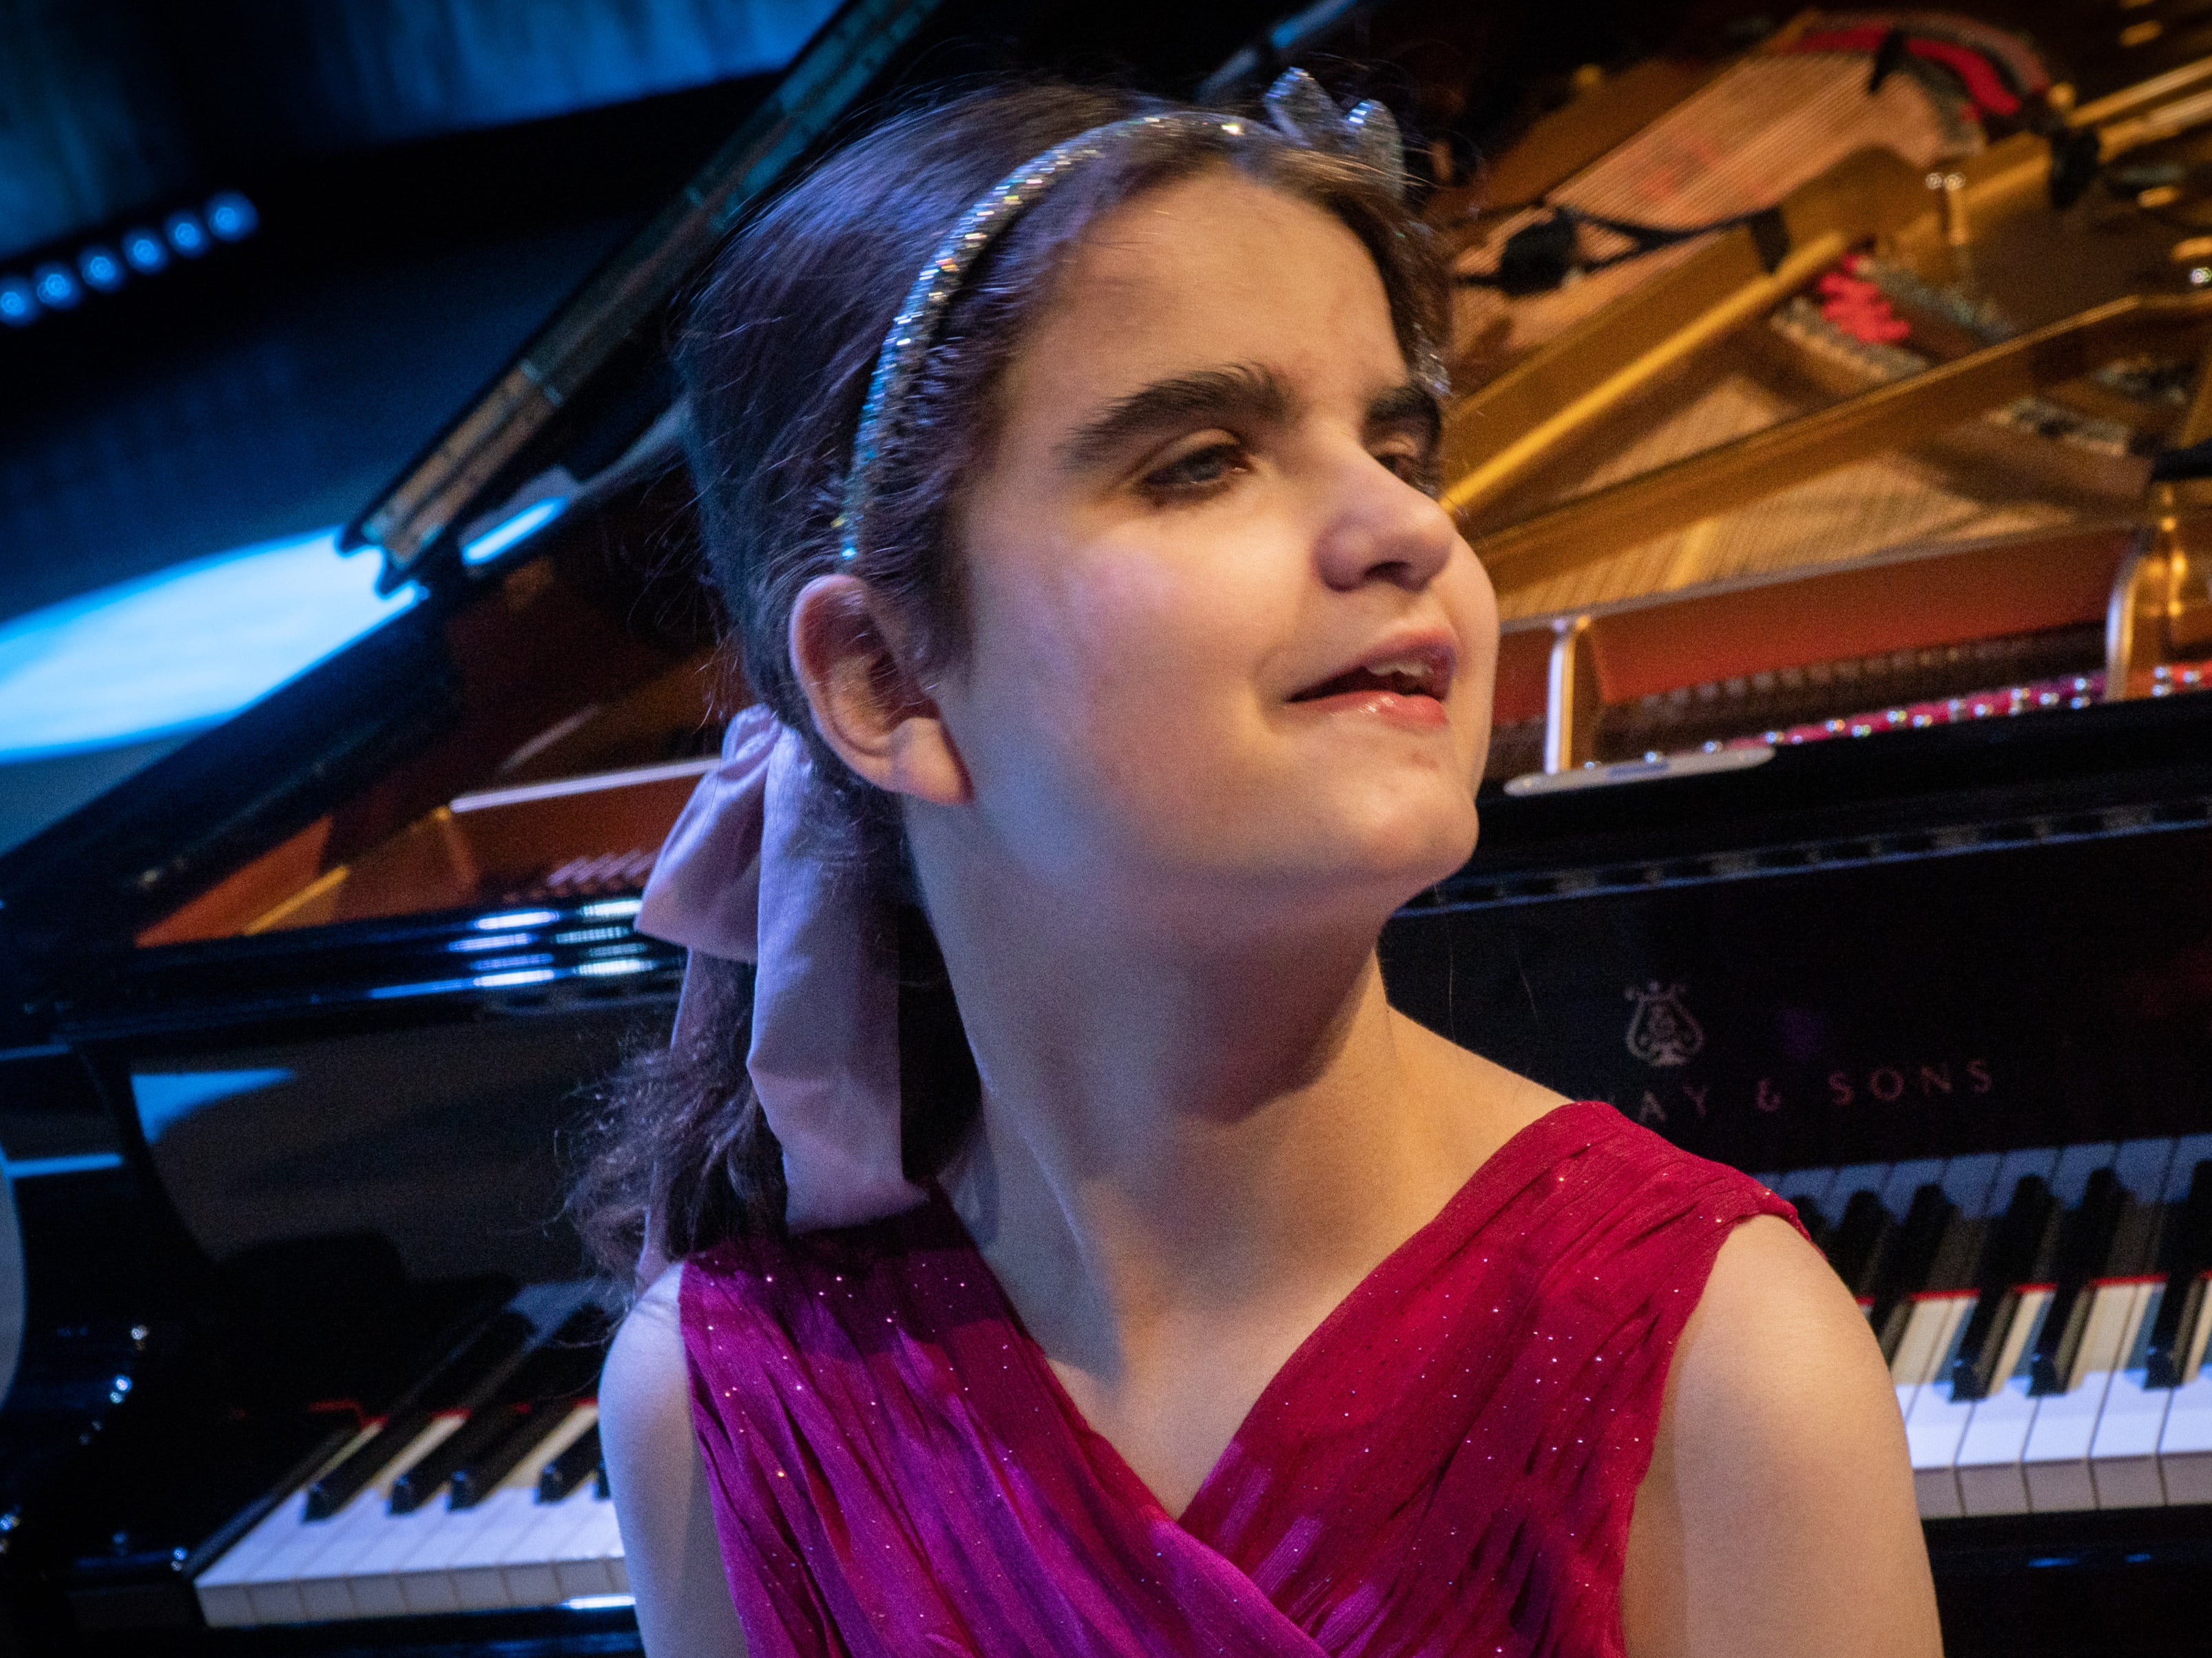 The Piano viewers in tears at astonishingly beautiful final performance from blind winner Lucy, 13 The Independent pic